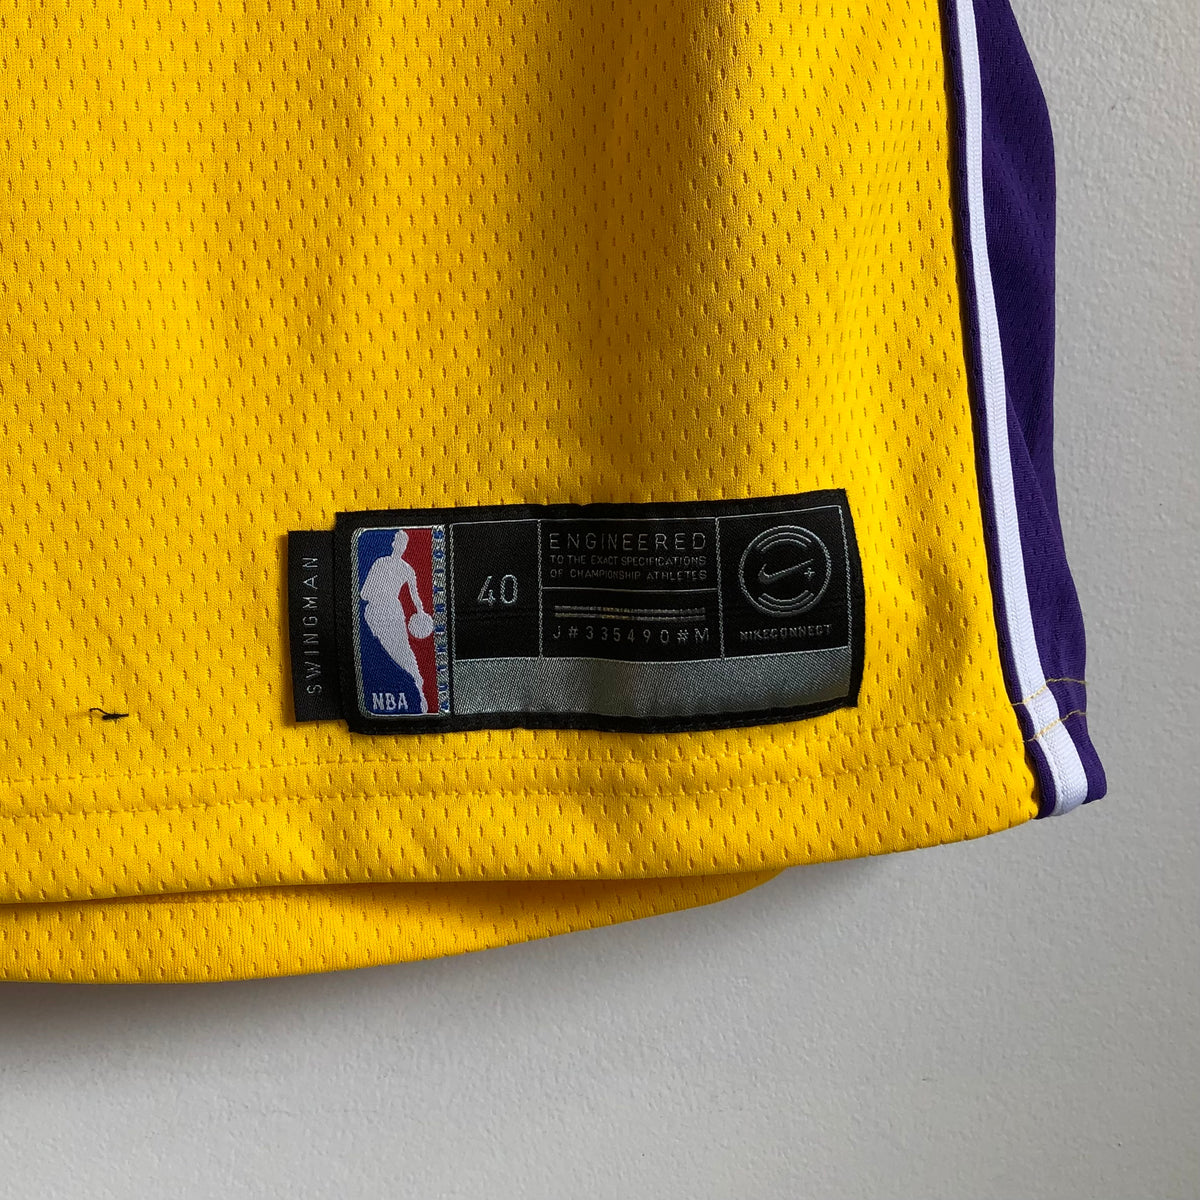 Lonzo Ball Los Angeles Lakers Jersey S – Laundry